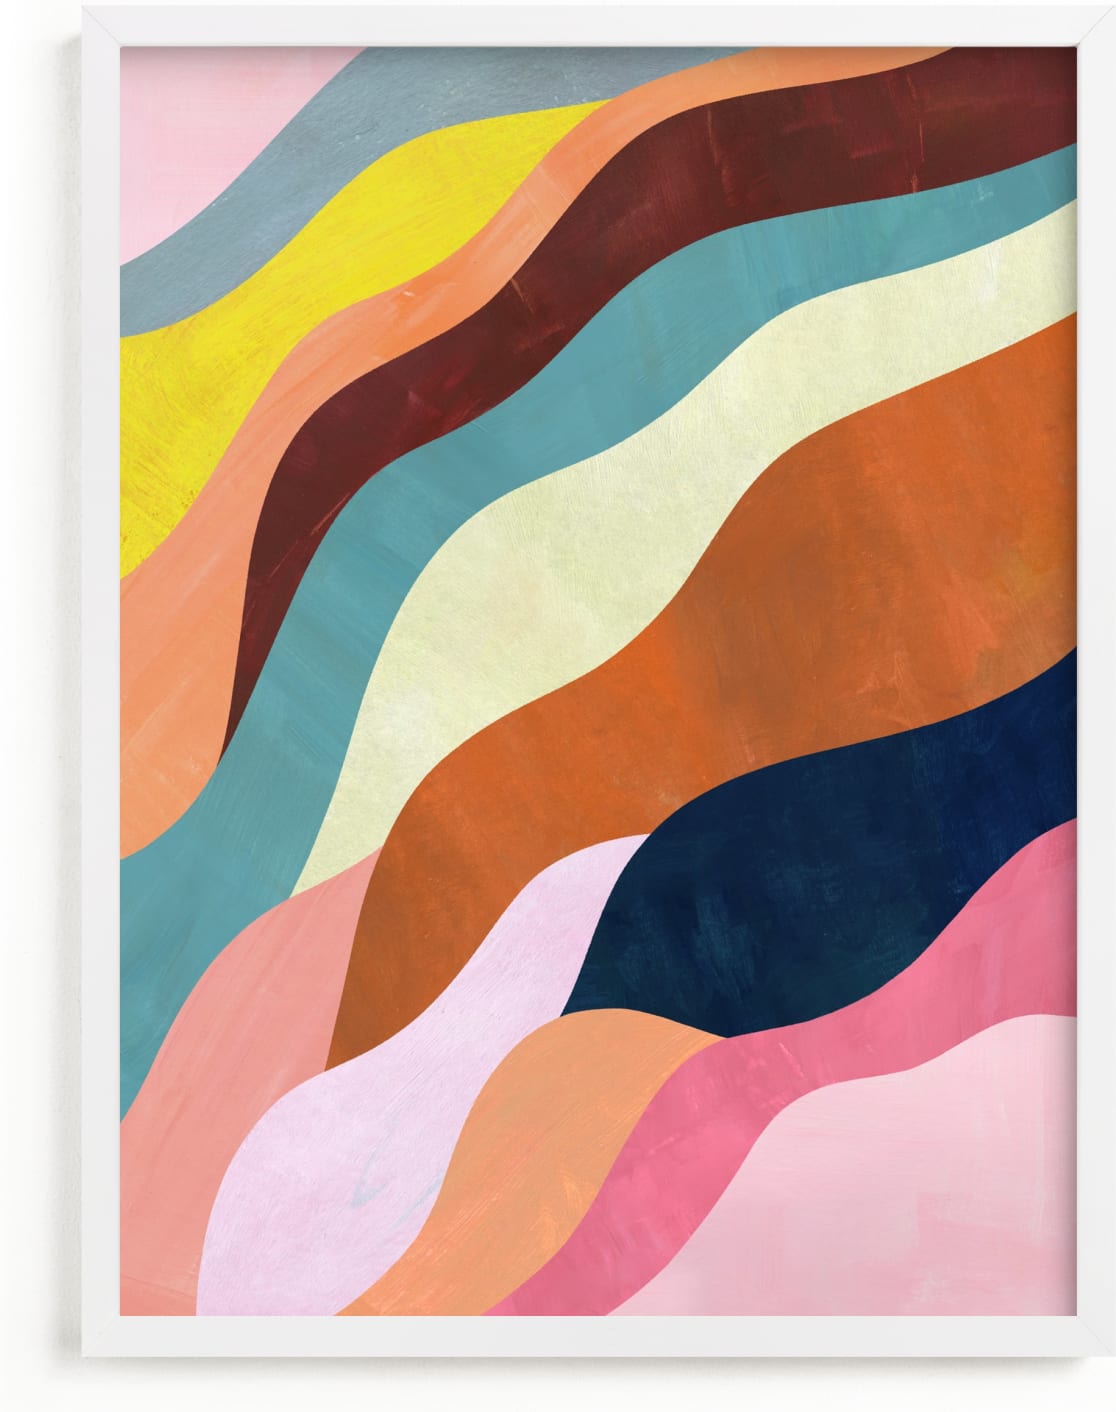 This is a brown, colorful, pink art by melanie mikecz called Natural Fluctuation II.